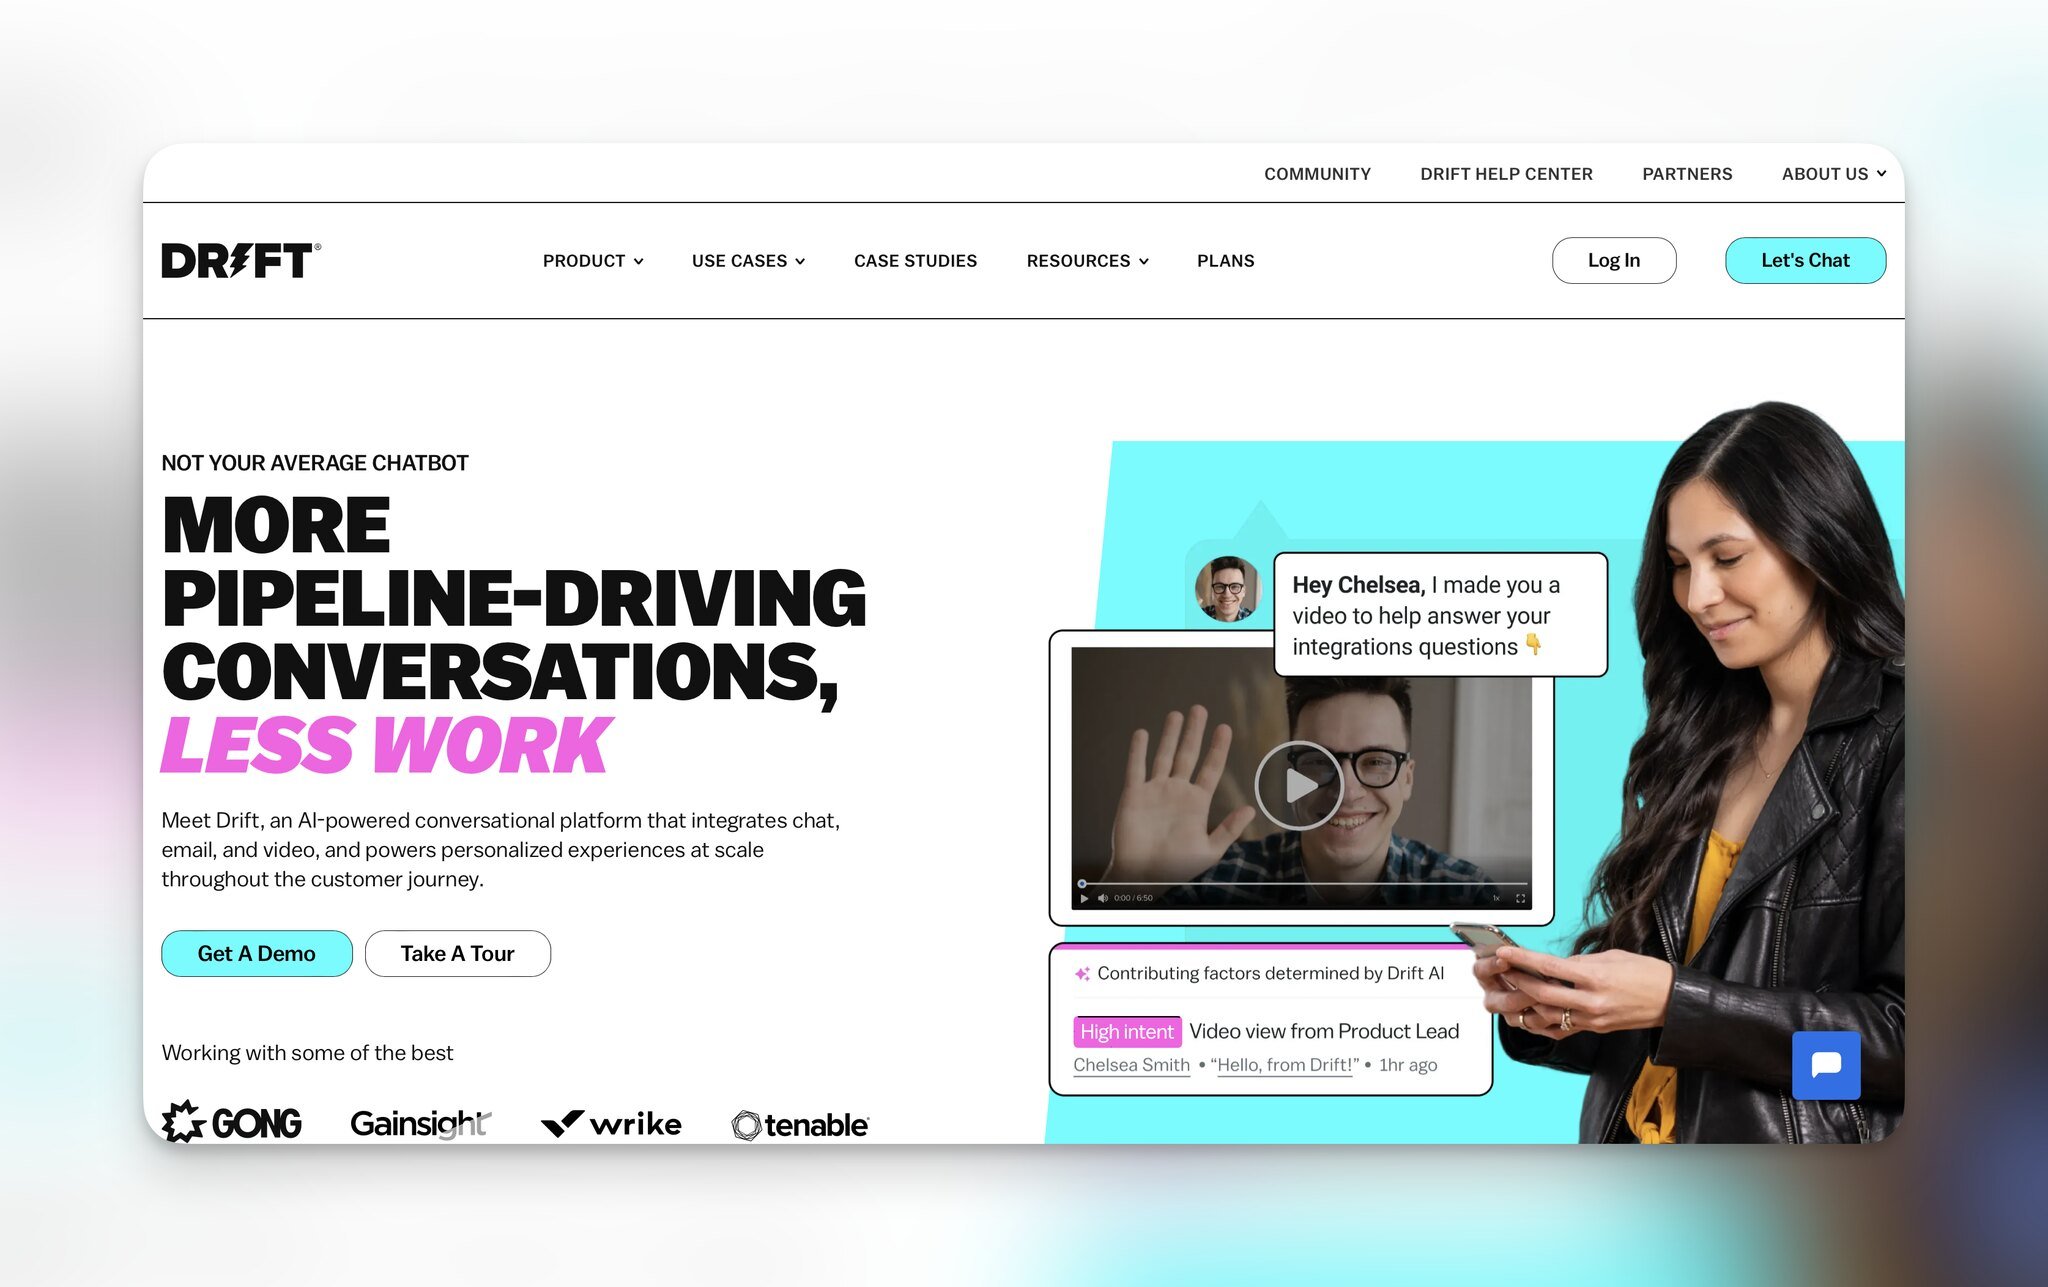 Drift's homepage with the headline "More pipeline-driving conversations, less work" followed by a turquise "Get a Demo" and on the right, there is a woman holding a phone and a video preview with chat bubbles around